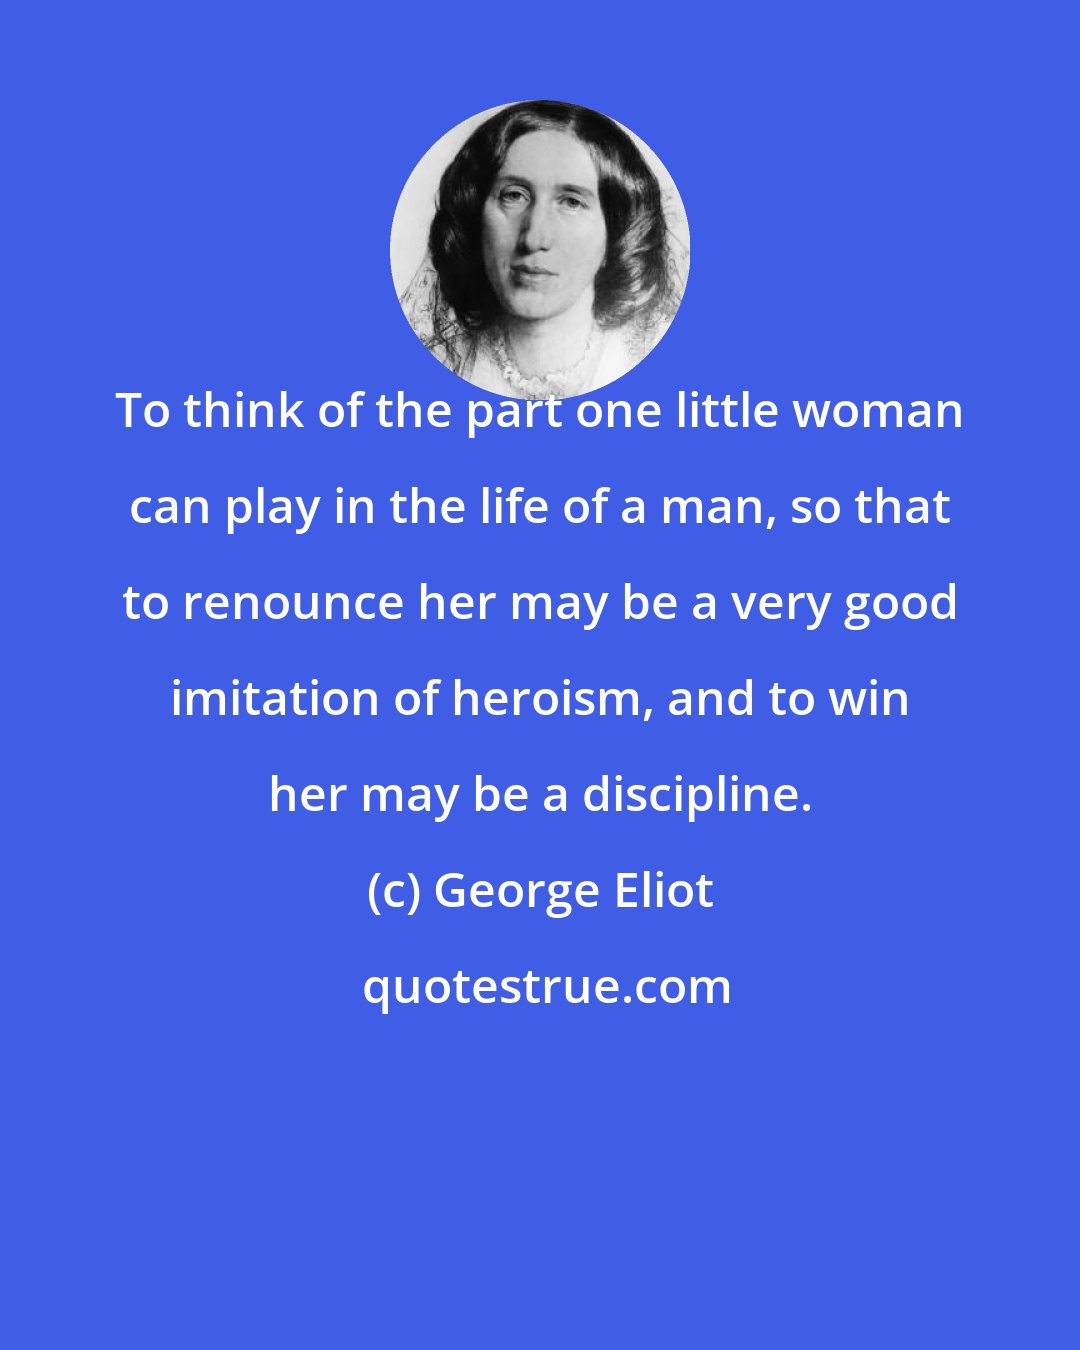 George Eliot: To think of the part one little woman can play in the life of a man, so that to renounce her may be a very good imitation of heroism, and to win her may be a discipline.